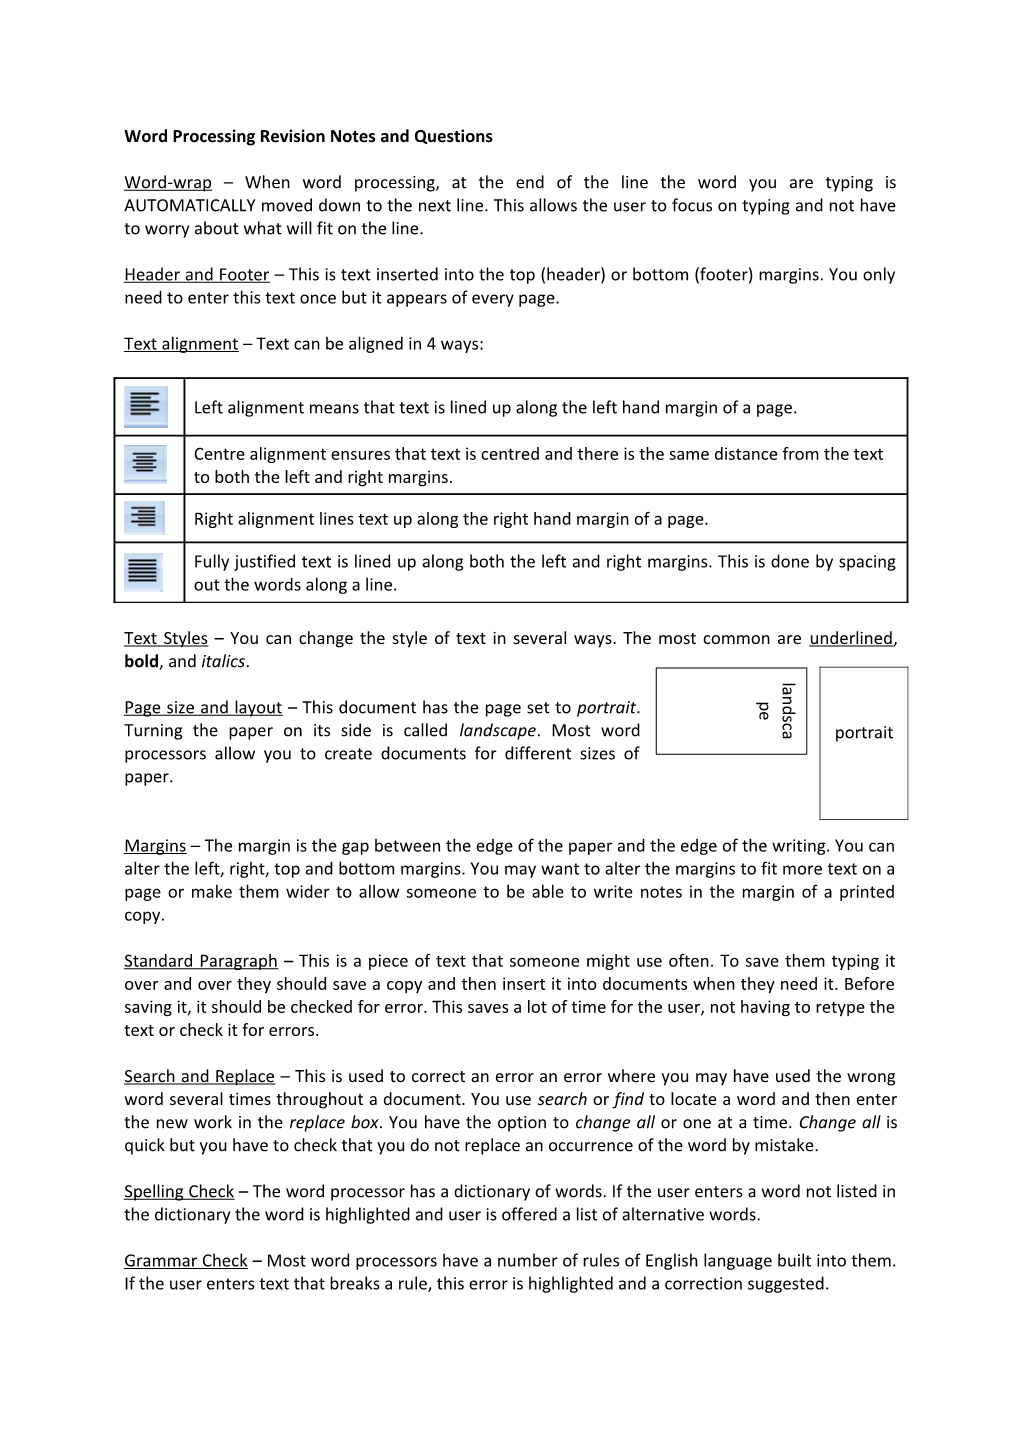 Word Processing Revision Notes and Questions